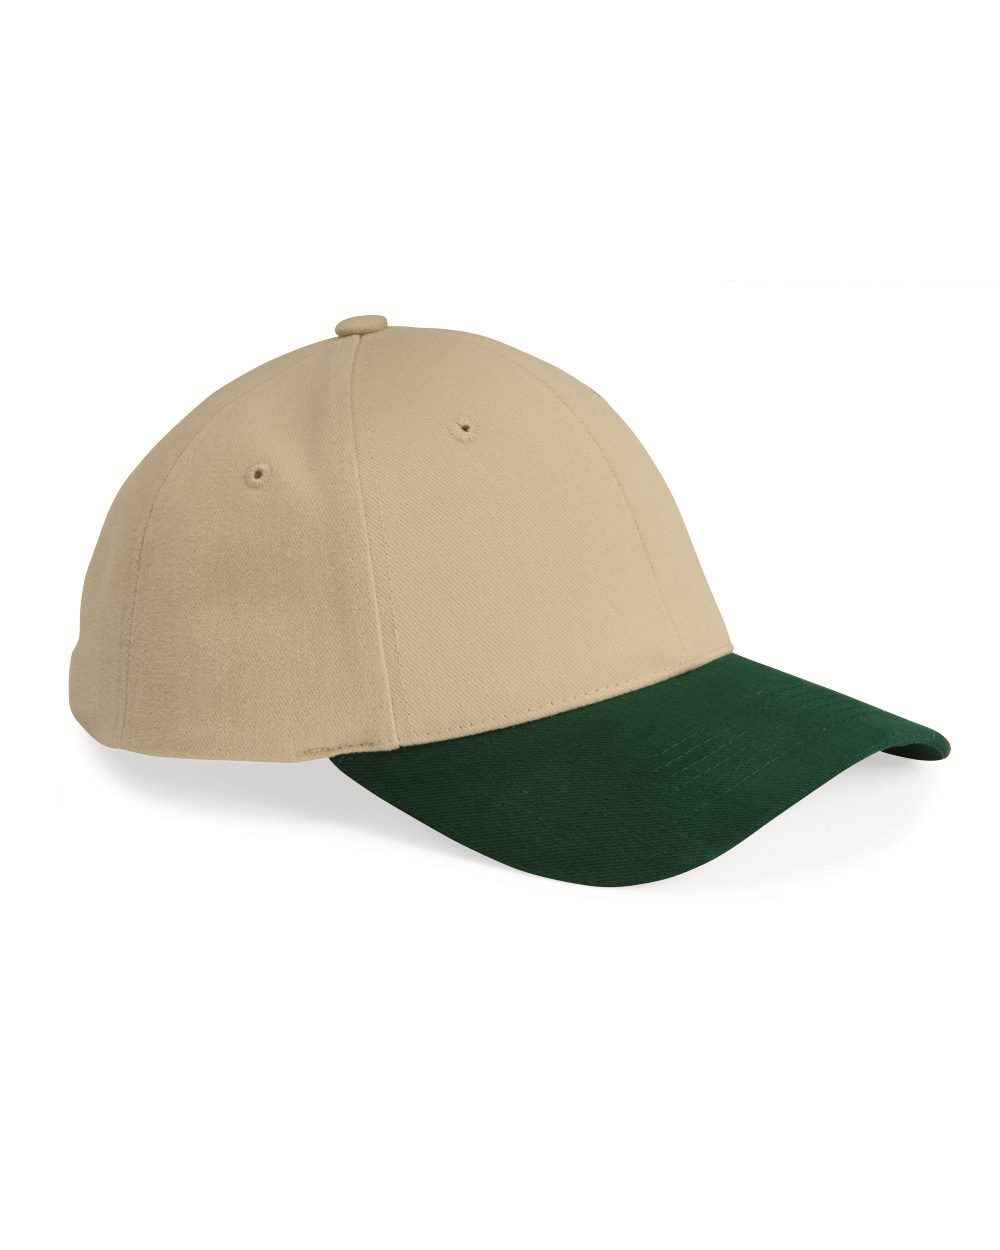 Sportsman Cap 9910 Structured Brushed Cotton Twill